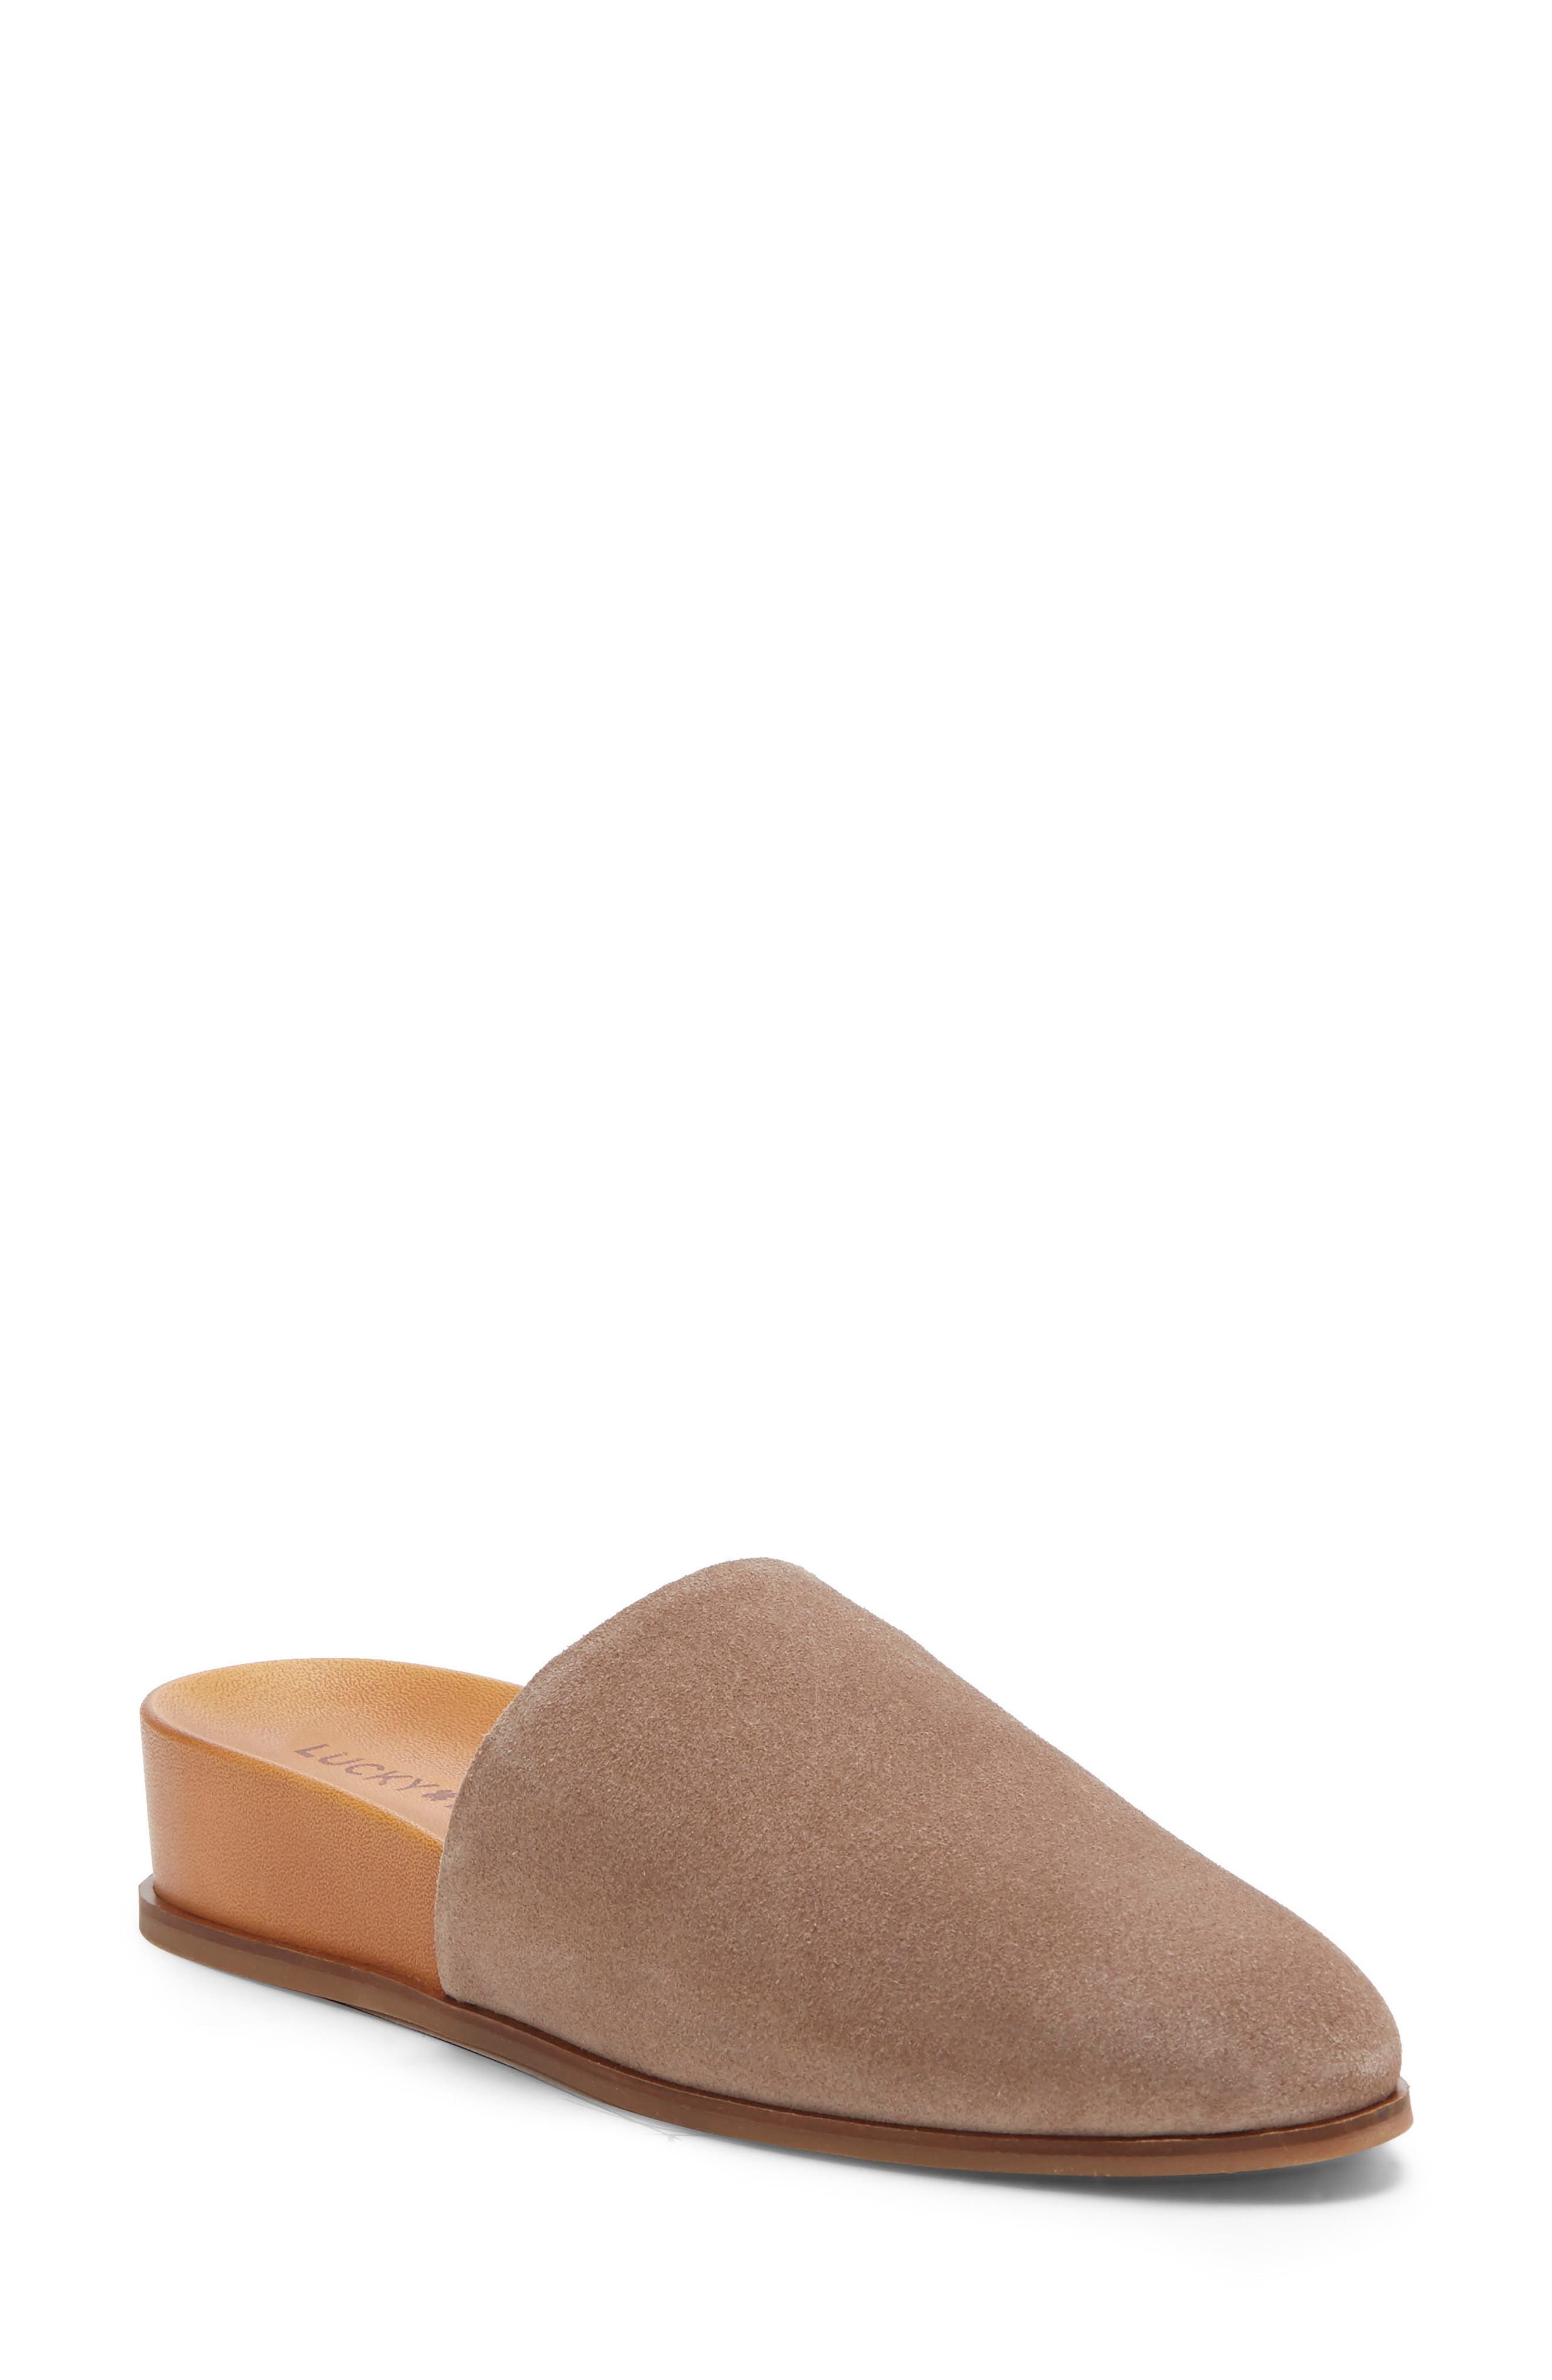 lucky brand suede mules